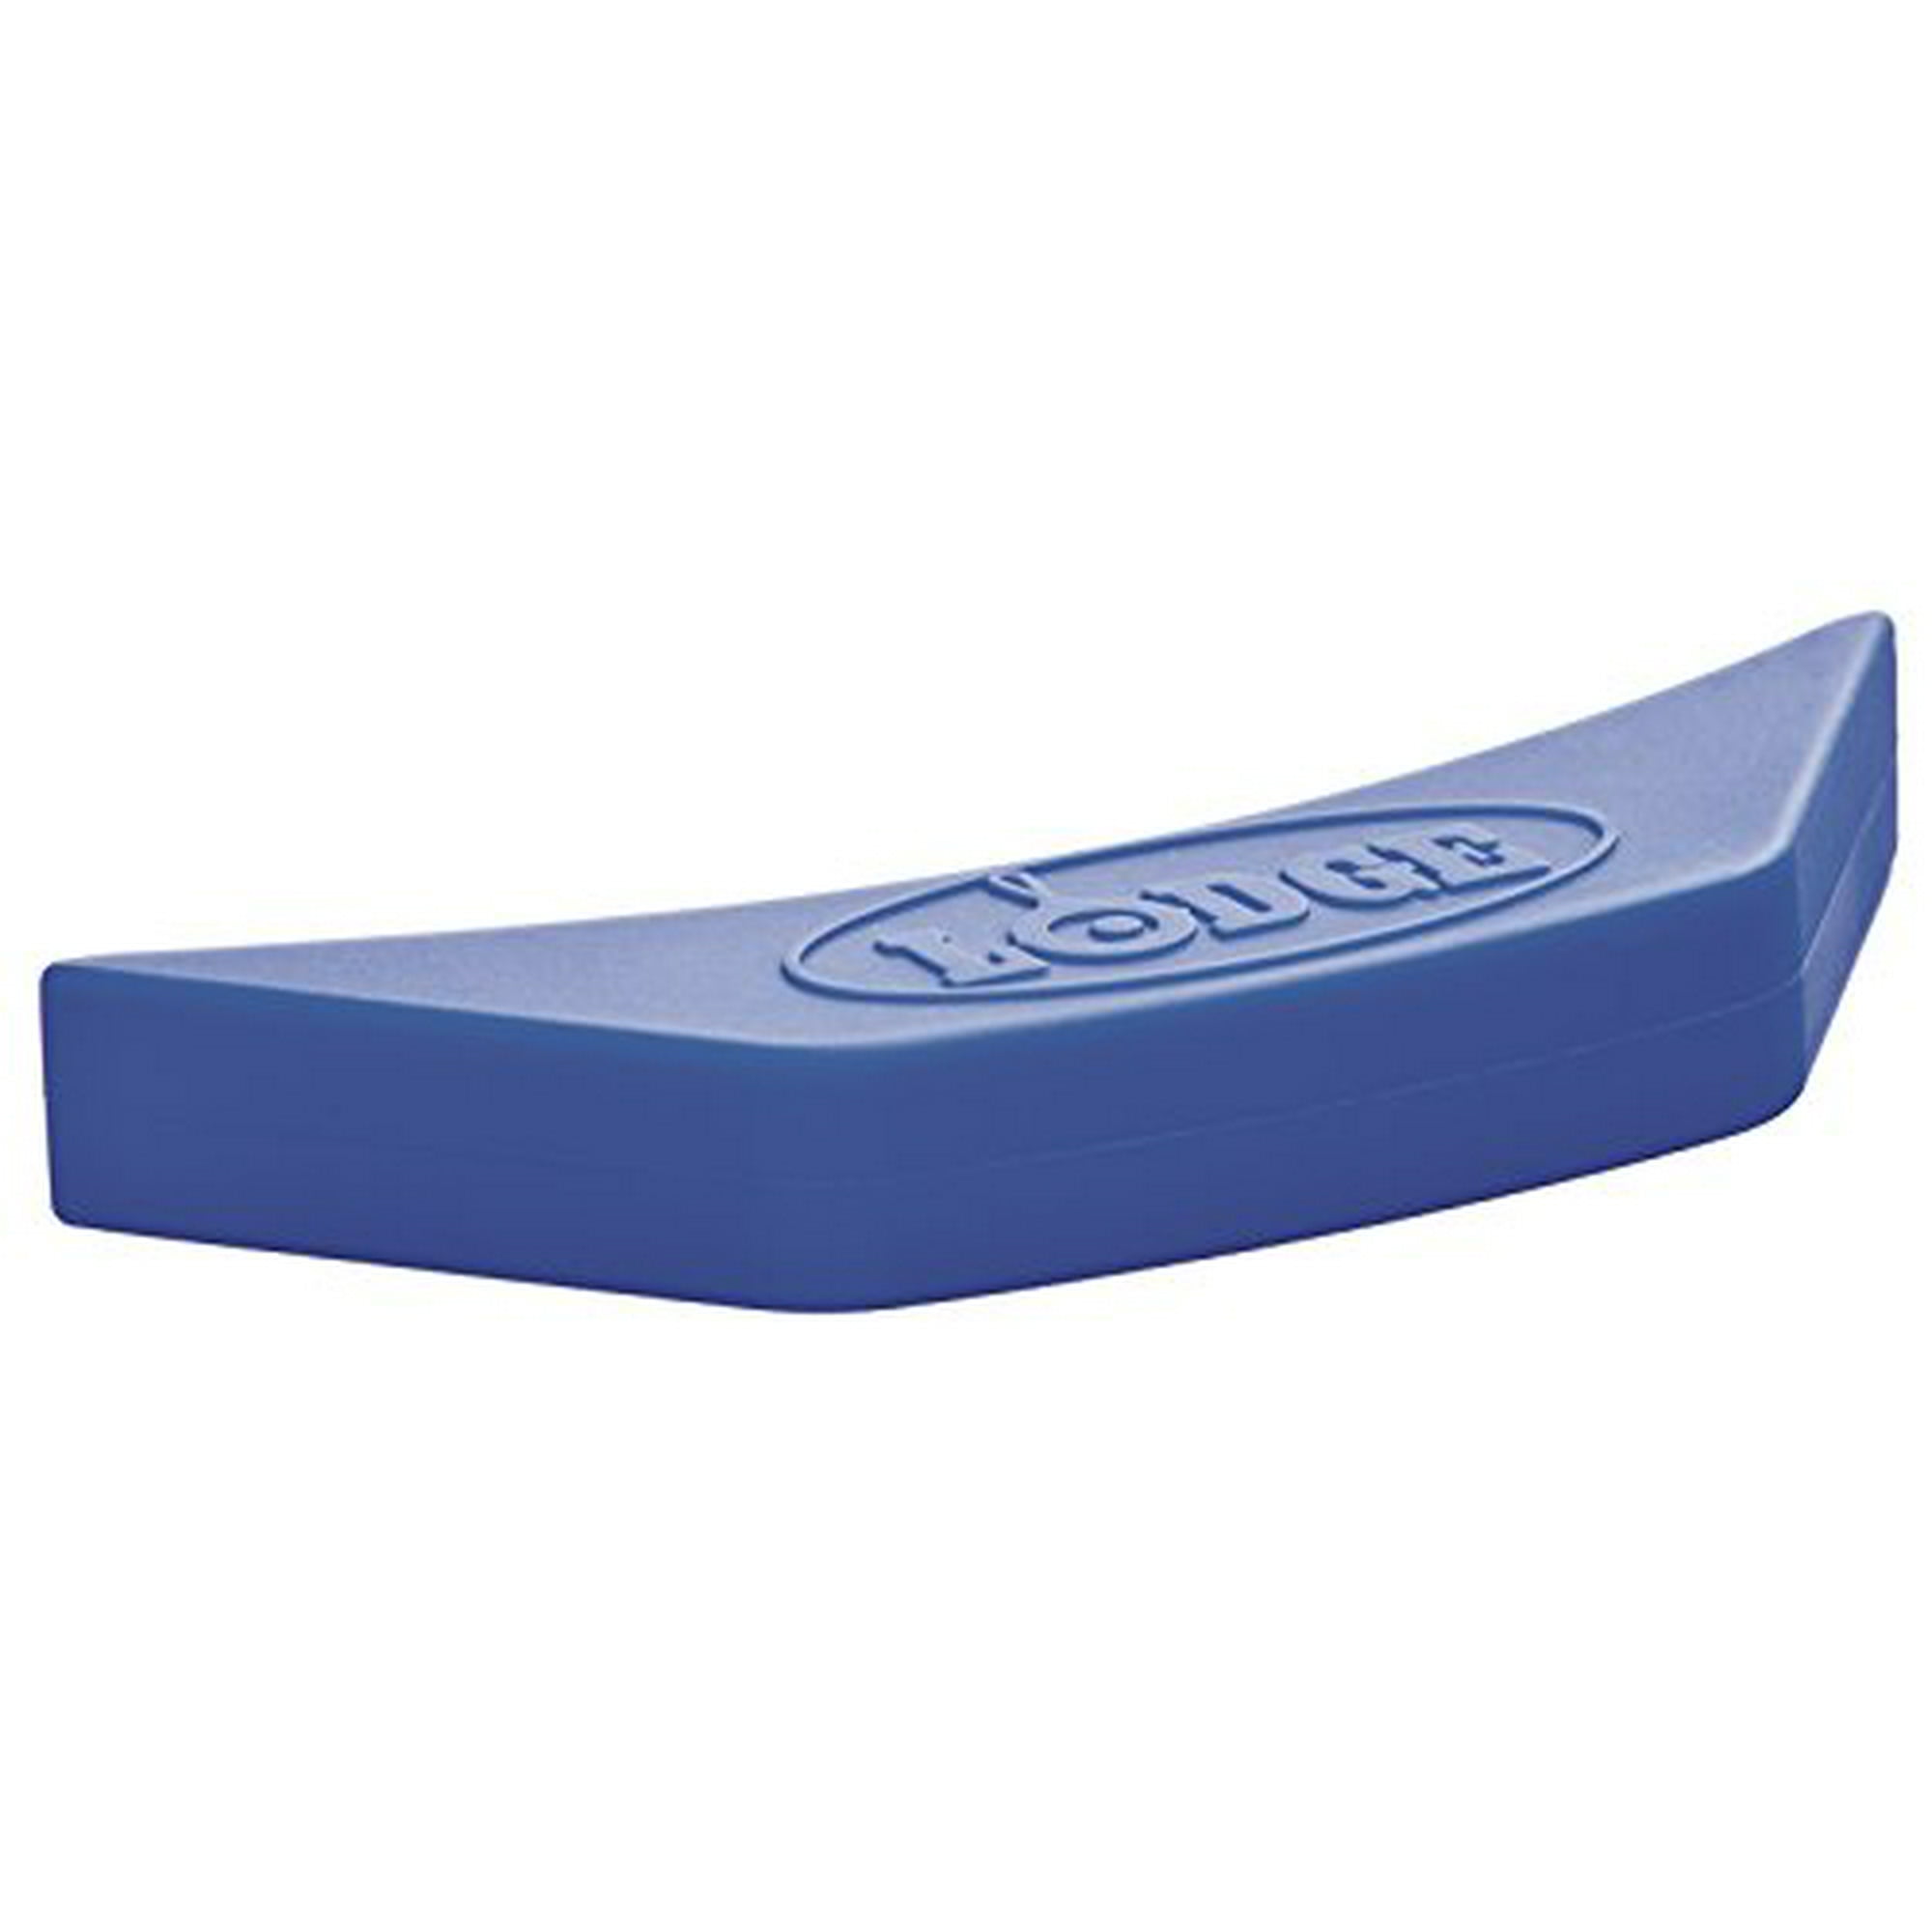 Lodge Silicone Assist Hot Handle Holder, 5.5 x 2, Blue 